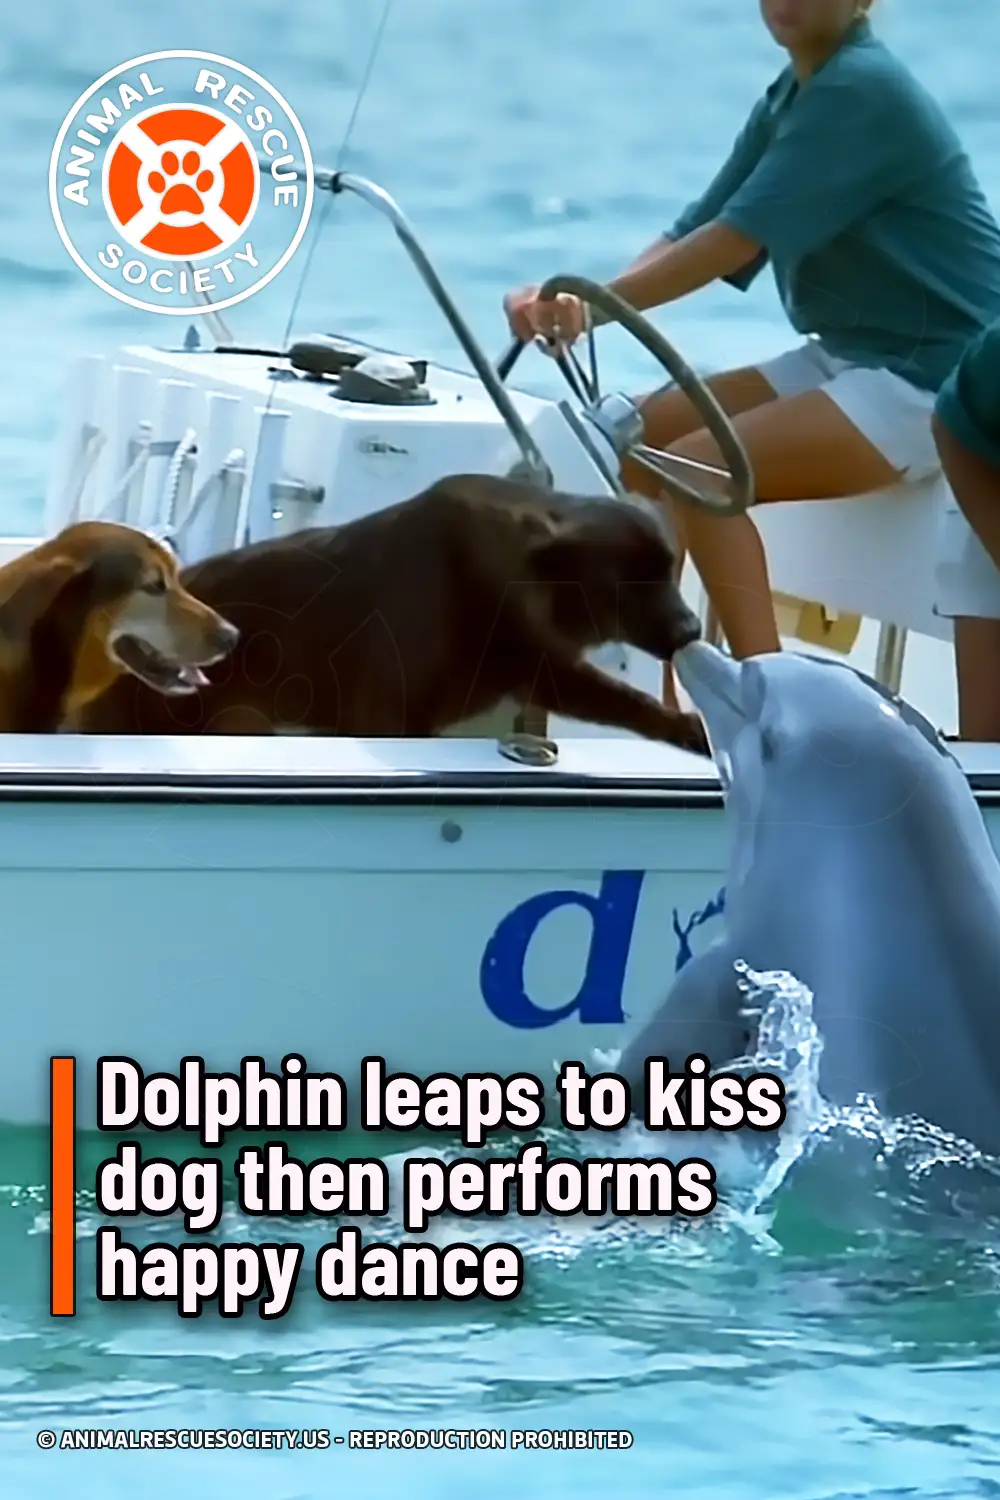 Dolphin leaps to kiss dog then performs happy dance